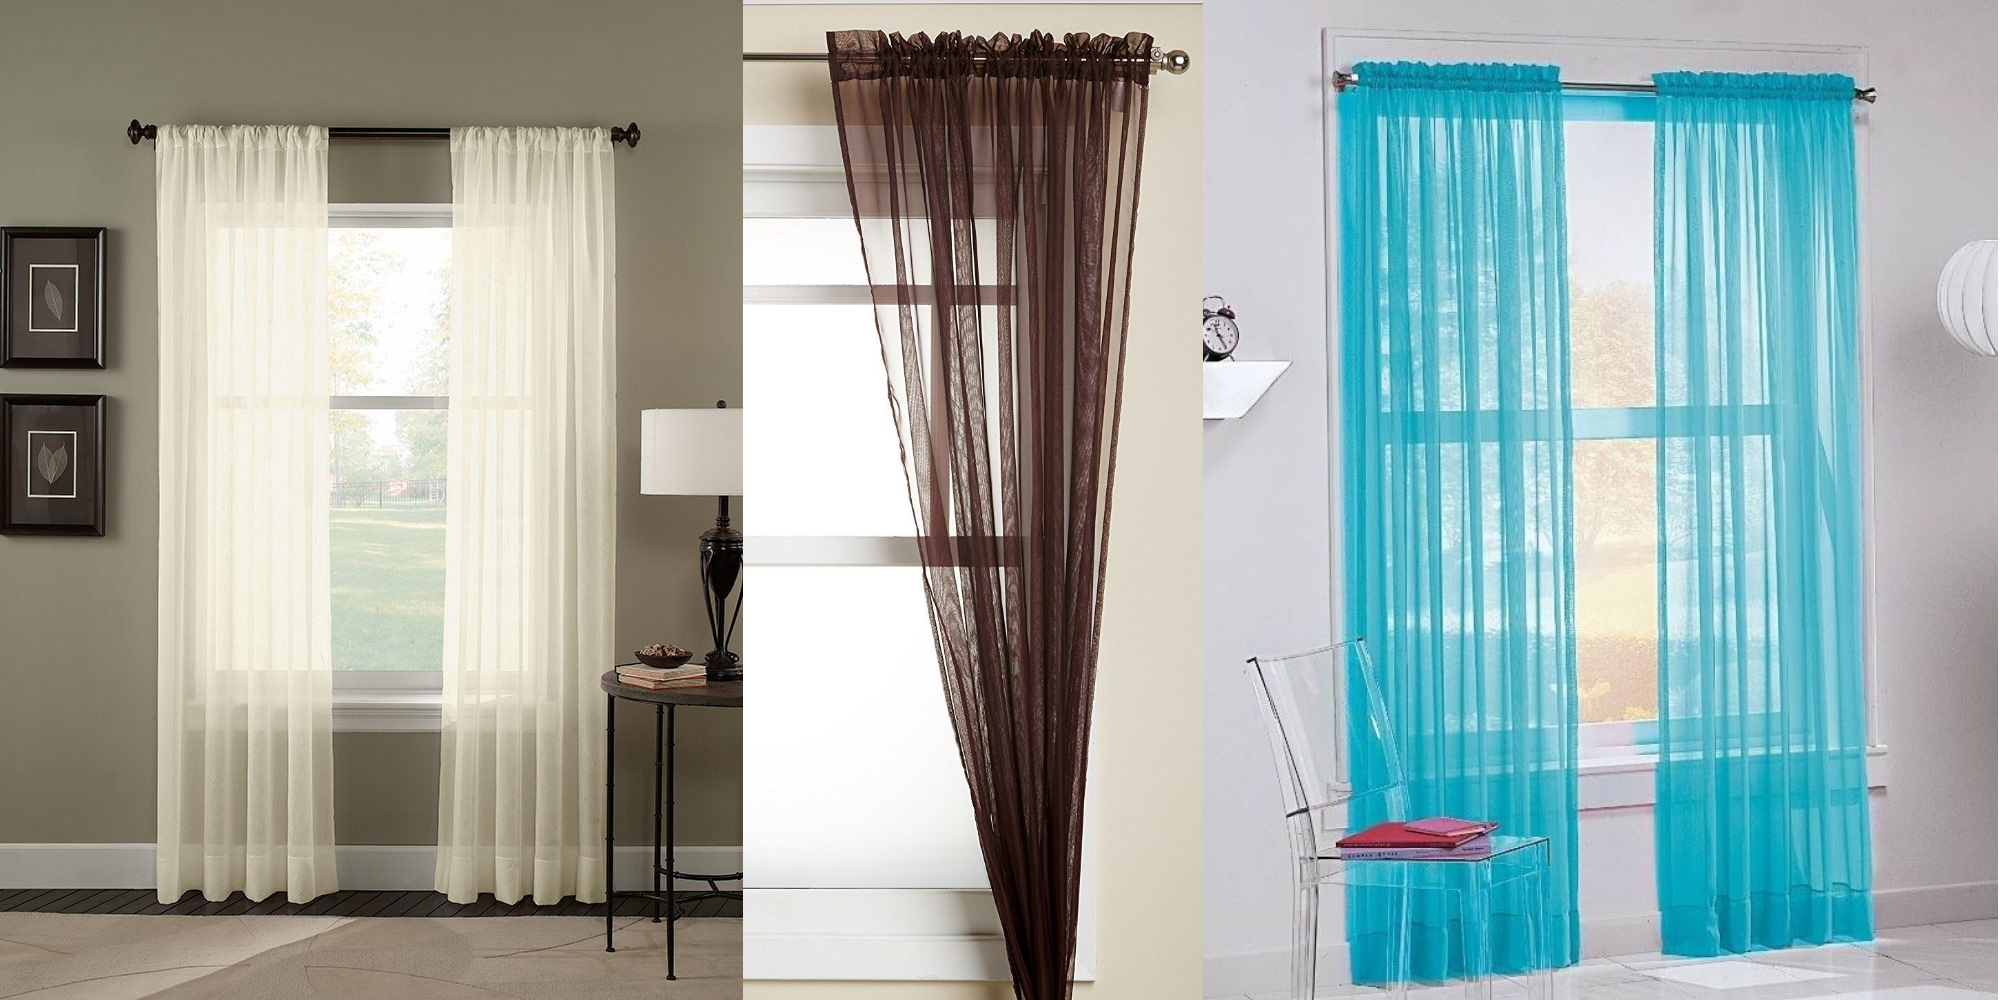 TWO Sheer Curtain Panels Only $7.07!! FREE Shipping!